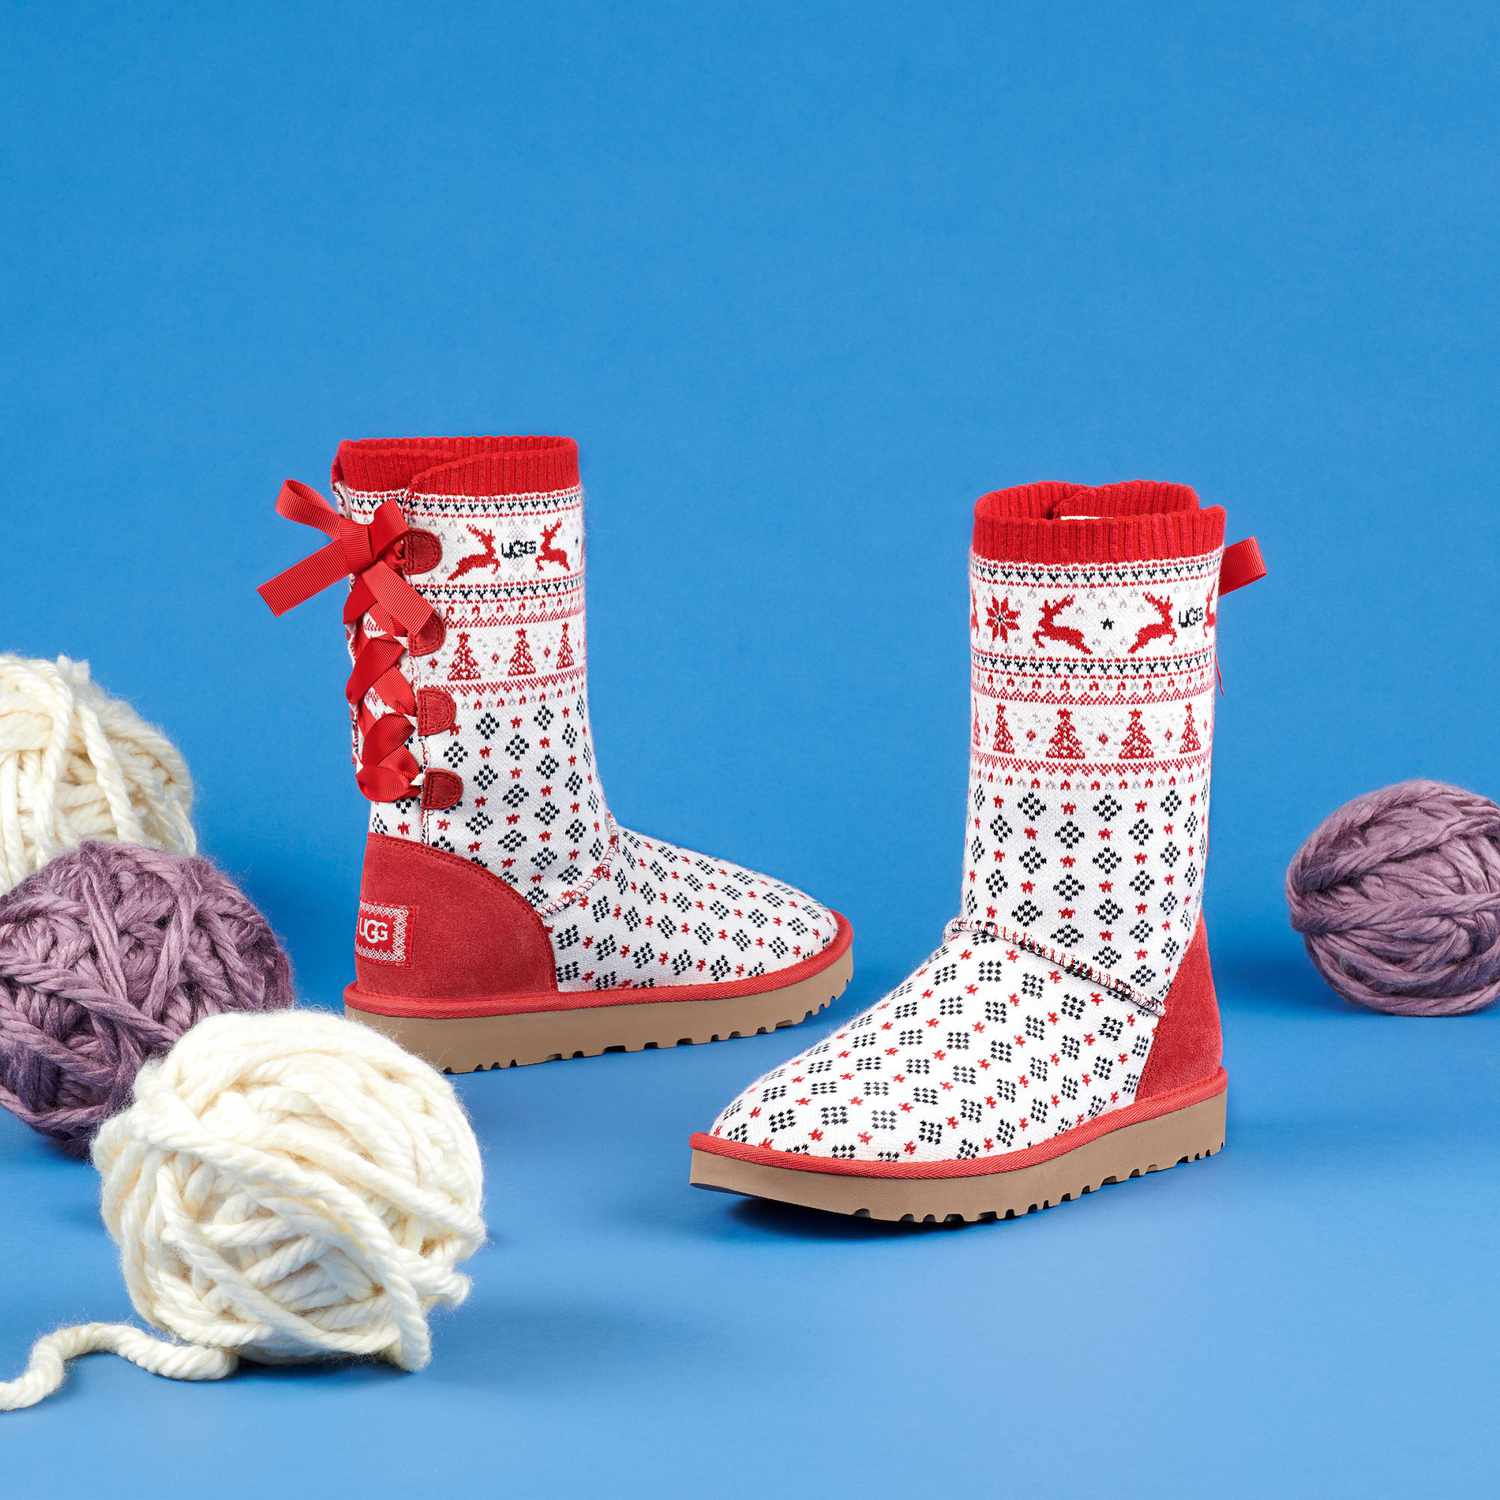 Zappos x Ugg Holiday Sweater Boots 